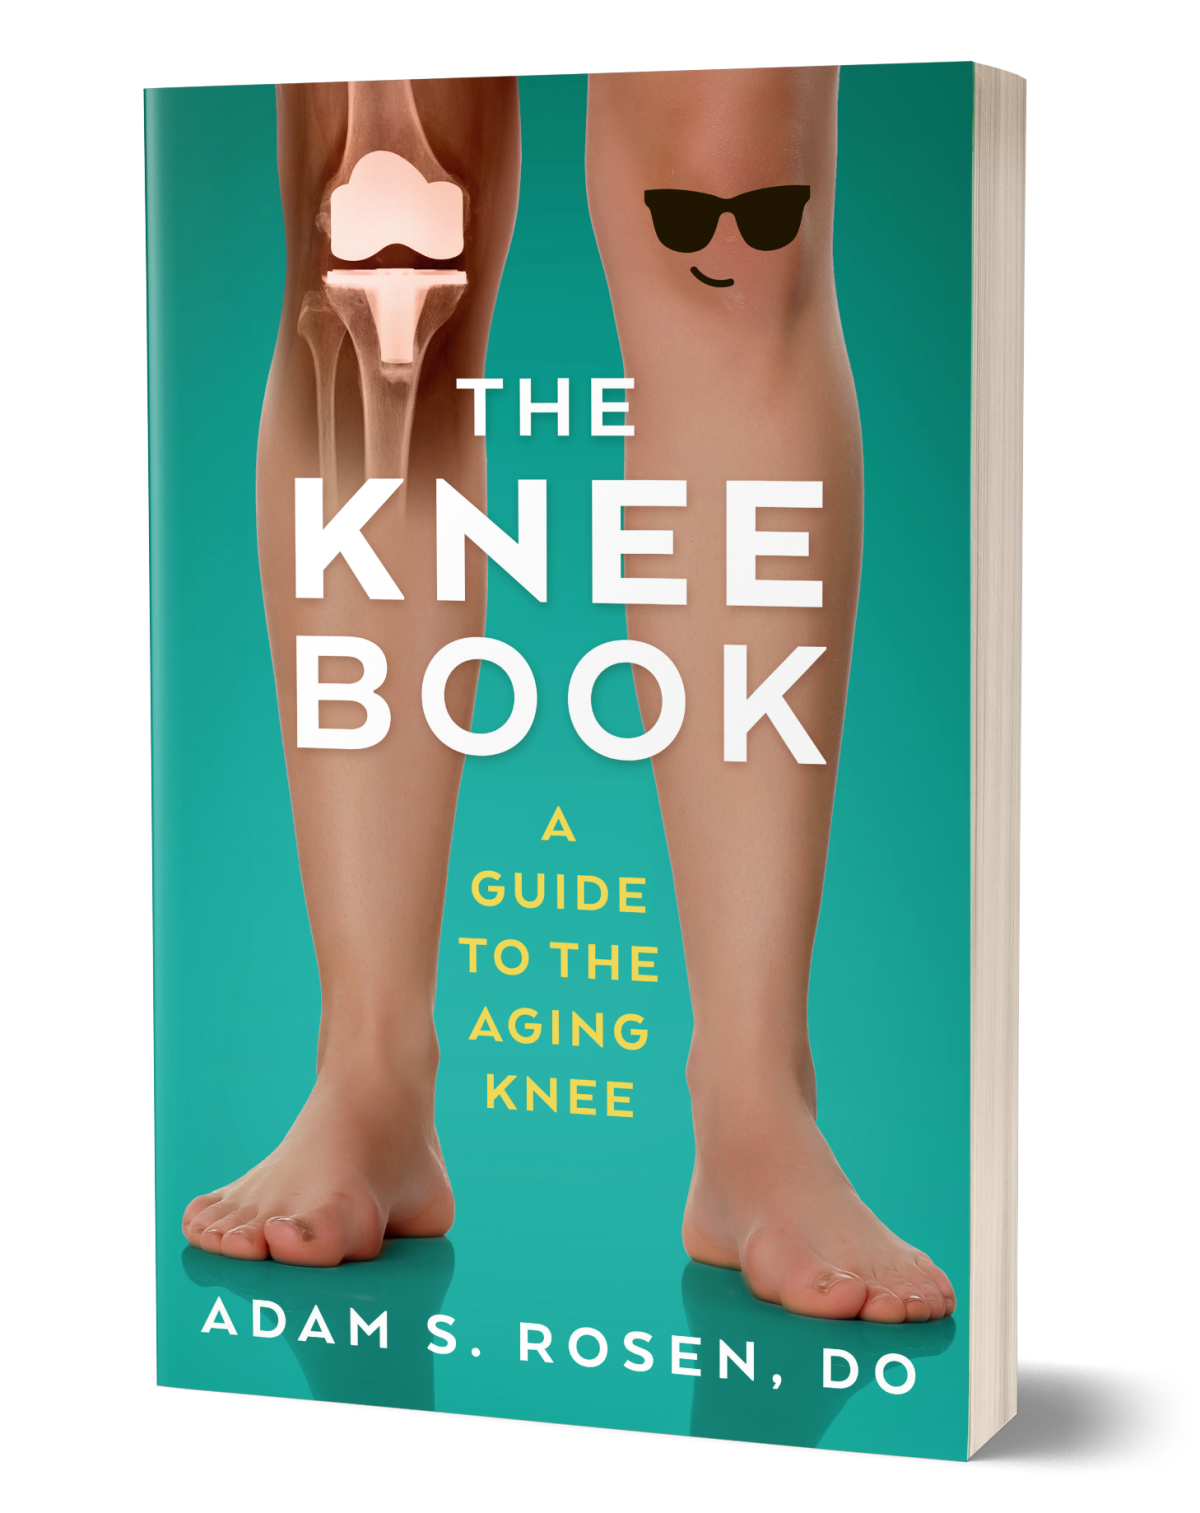 The cover of “The Knee Book: A Guide to the Aging Knee”